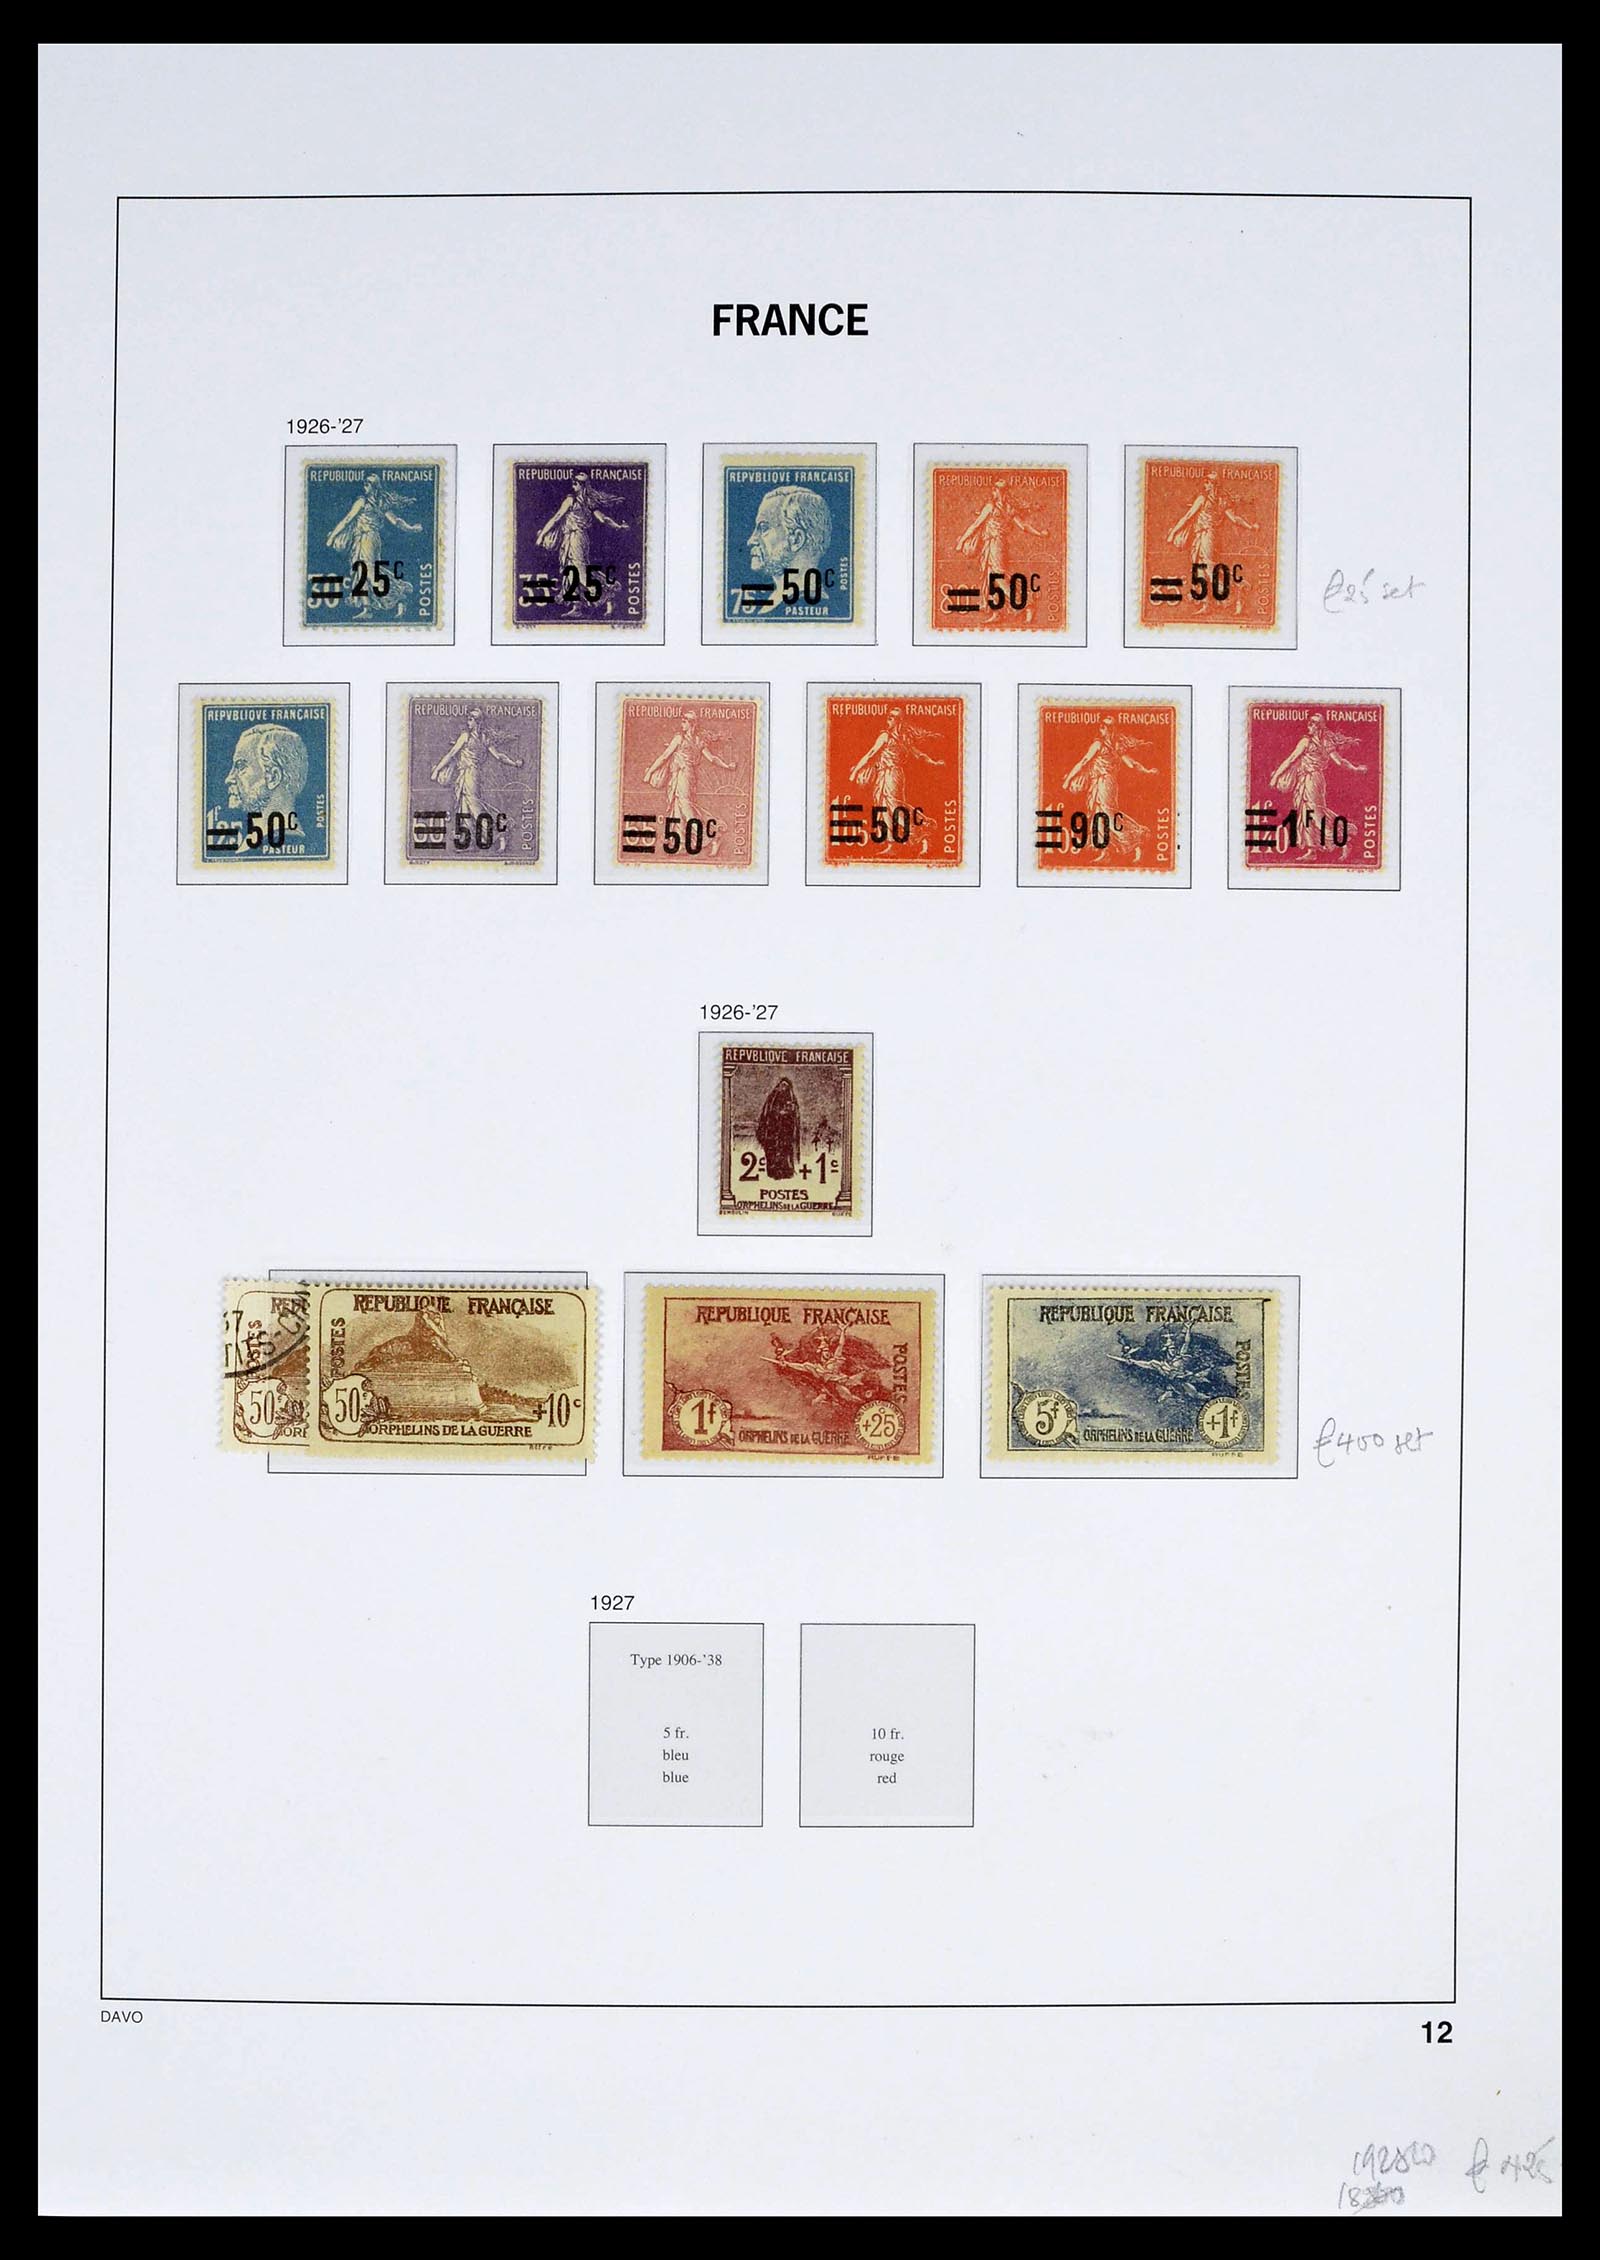 39335 0027 - Stamp collection 39335 France 1849-1969.